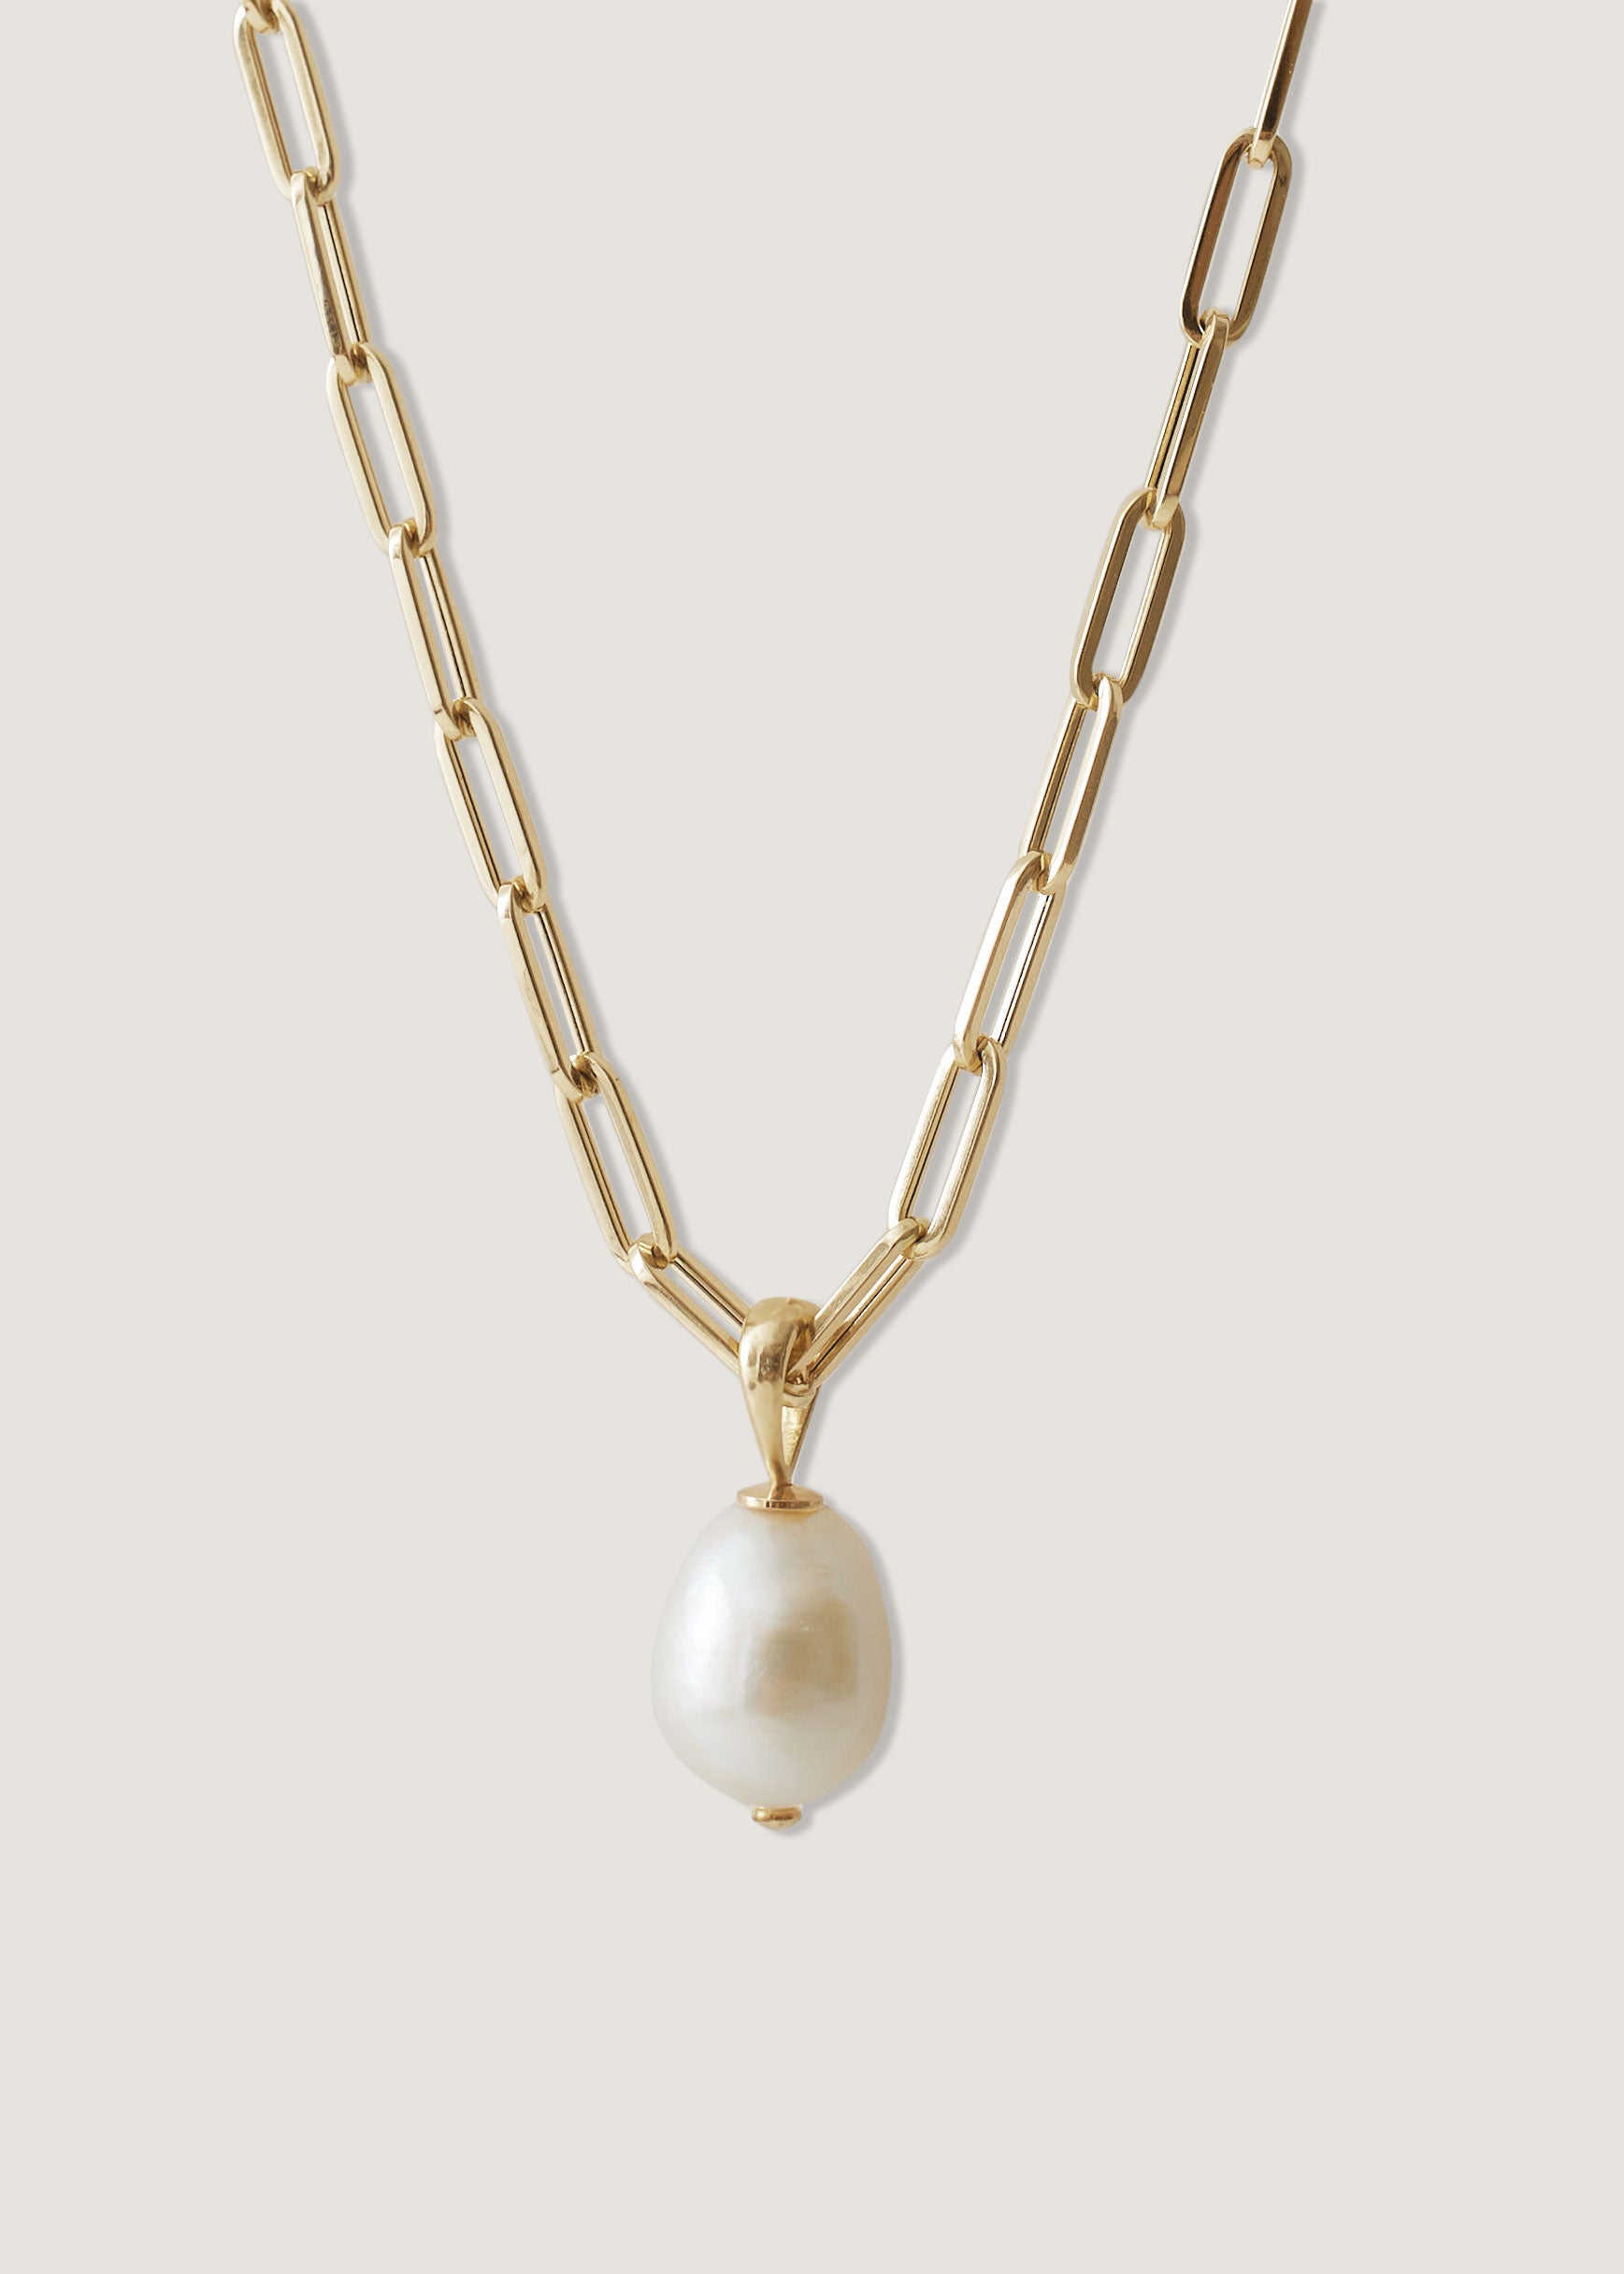 alt="Baroque Pearl Pendant I with Petite Link Chain Necklace"